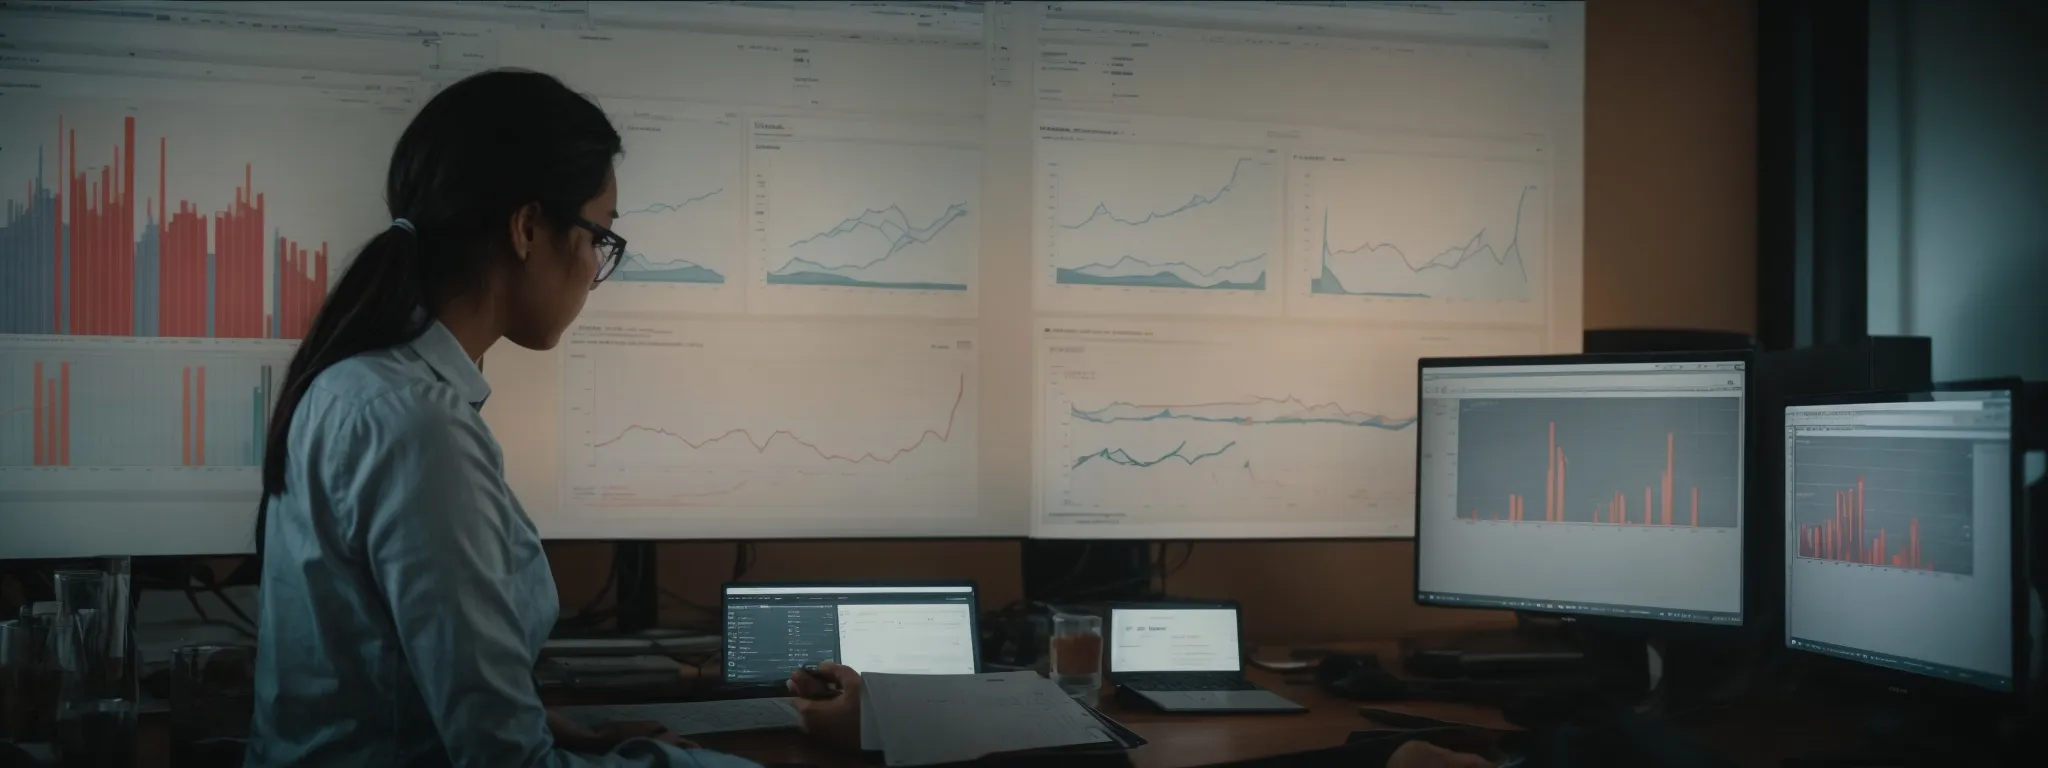 a person analyzing charts and graphs on a computer screen, indicative of website analytics.